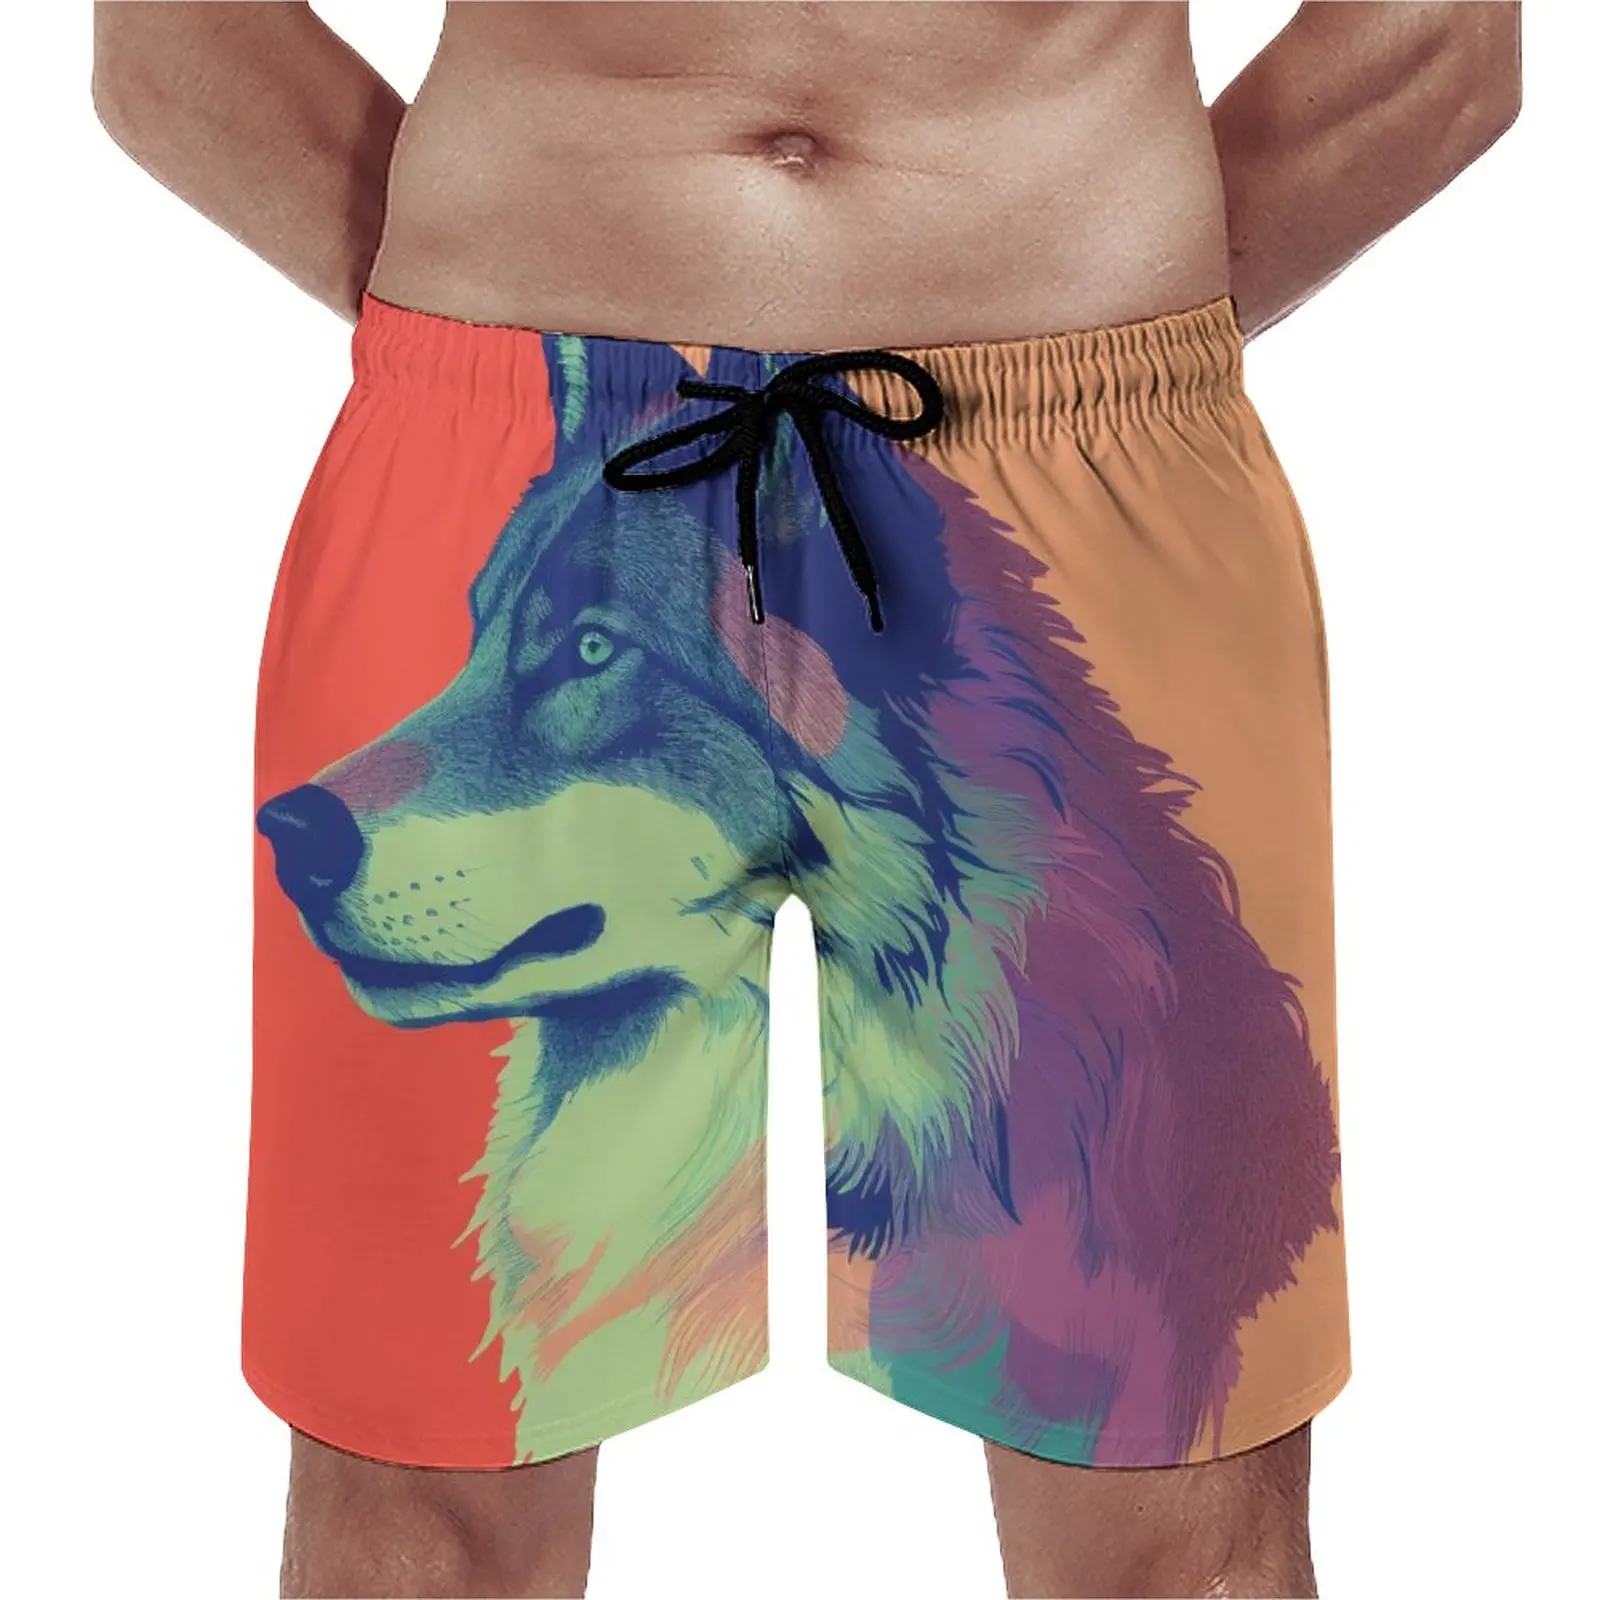 

Wolf Board Shorts Summer Neo Fauvism Minimalism Sports Surf Beach Short Pants Males Quick Dry Cute Design Plus Size Beach Trunks